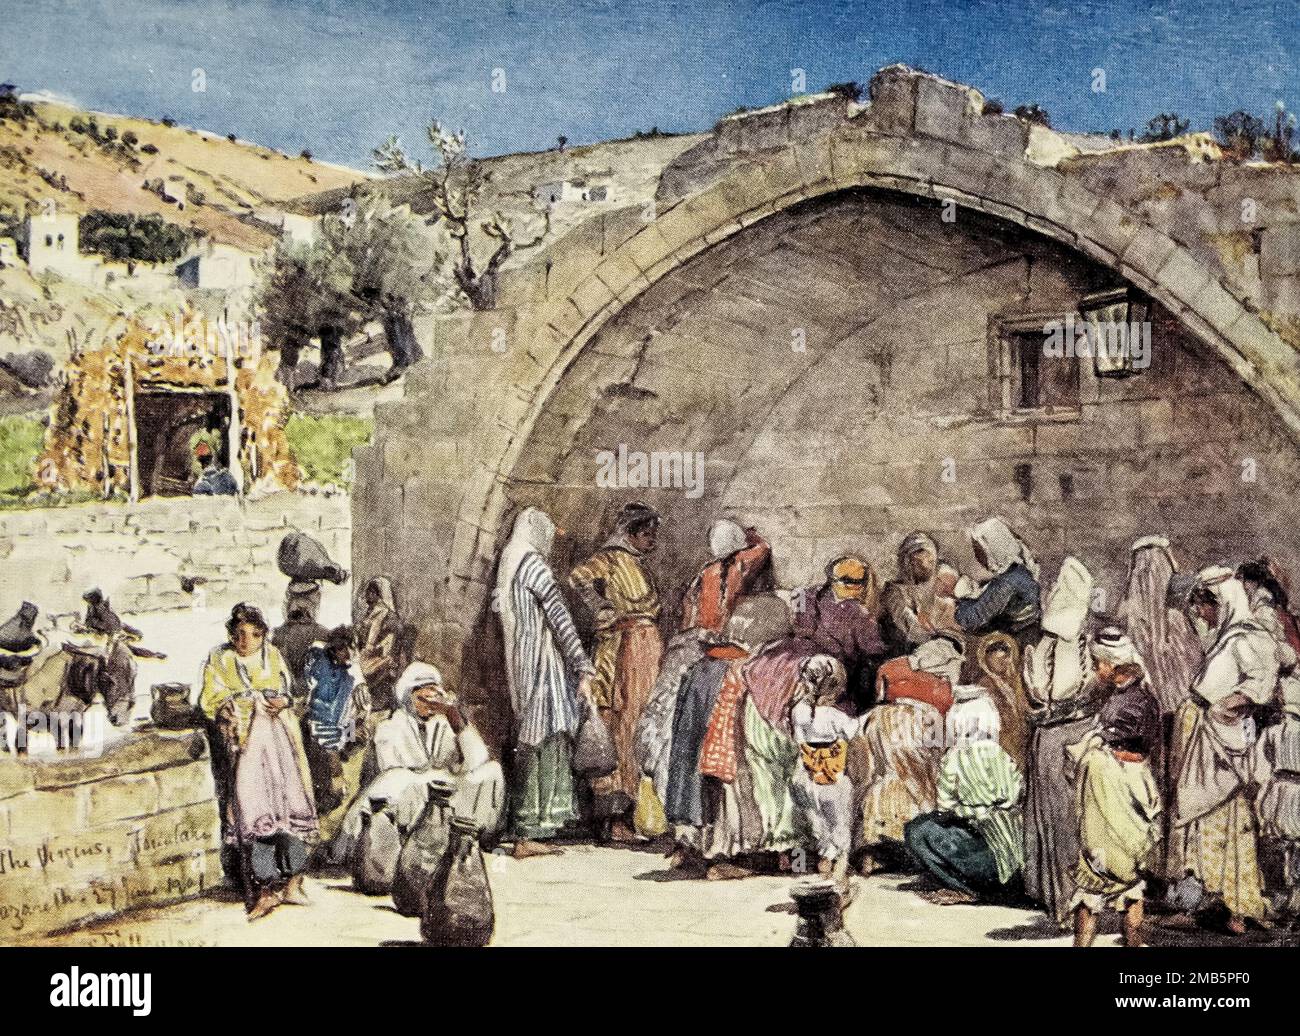 The Fountain of the Virgin at Nazareth Painted by John Fulleylove from the book ' The Holy land ' Described by John Kelman 1864-1929 Publication date 1902 Publisher London : A. & C. Black Stock Photo